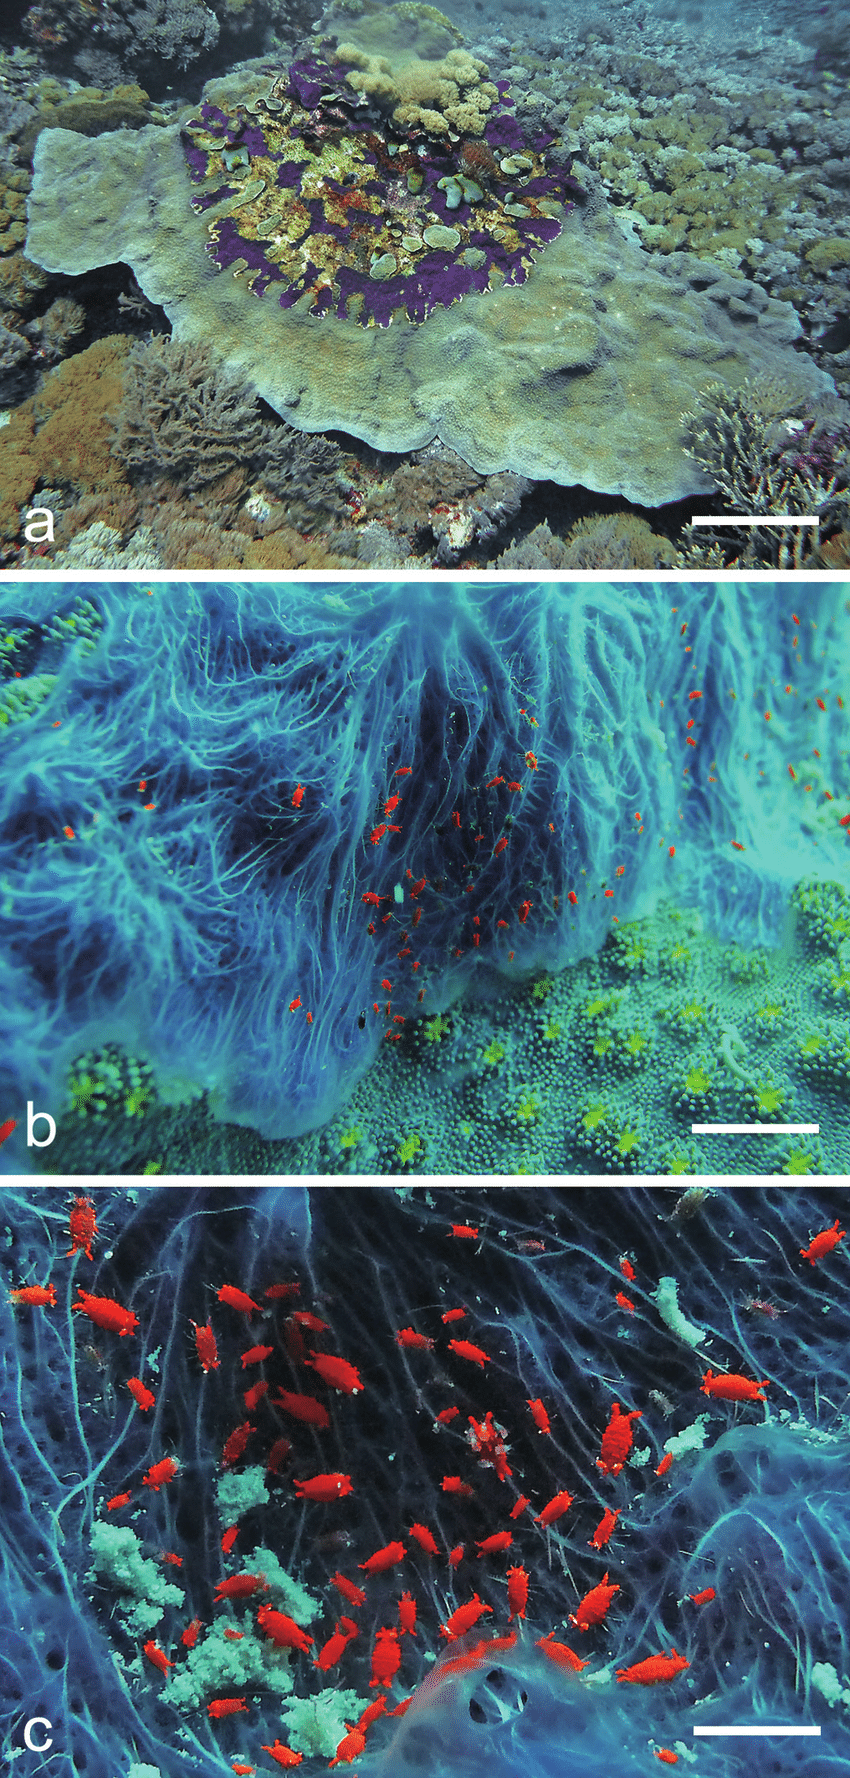 Association of red fluorescent Santia isopods with the coral-killing sponge Chalinula nematifera. a C. nematifera progression on a large living Echinopora sp. coral colony, b closeup of Echinopora sp. sponge-coral overgrowth zone with associated Santia isopods, c cluster of Santia isopods in a sponge surface hollow, scale bars: 0.4 m (a), 2.5 cm (b), 1.0 cm (c). All photographs were taken during daytime exposed by the water depth-specific natural light spectrum (without excitation/emission filters) using a commercial grade digital still camera (Panasonic DMC-TZ5, 1/2.33″ CCD sensor) and recorded in sRGB (24 bit) colour mode. 